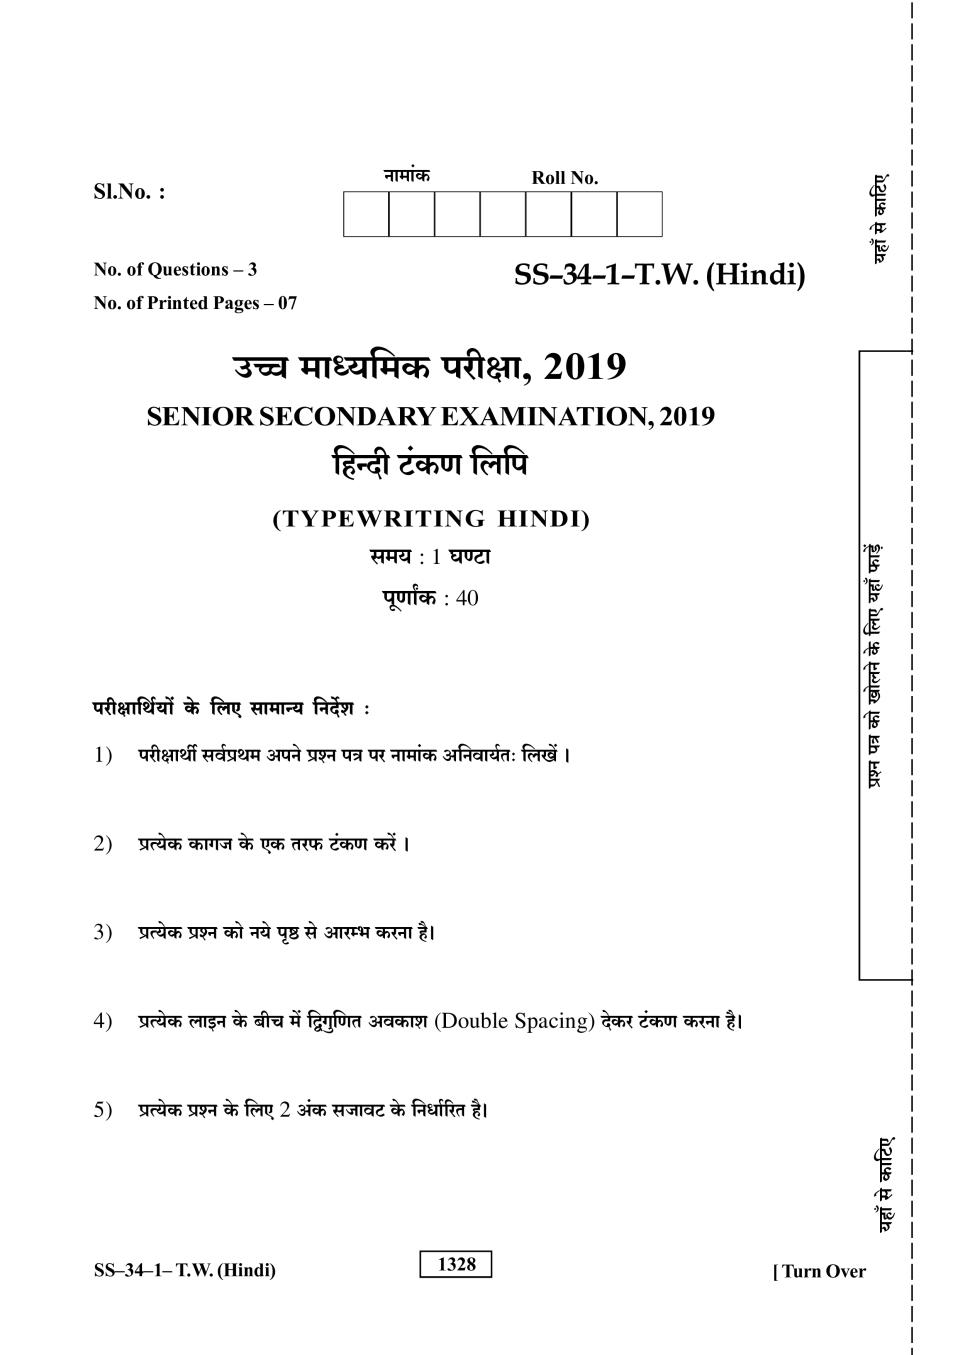 Rajasthan Board 12th Class Typewriting Hindi Question Paper 2019 - Page 1